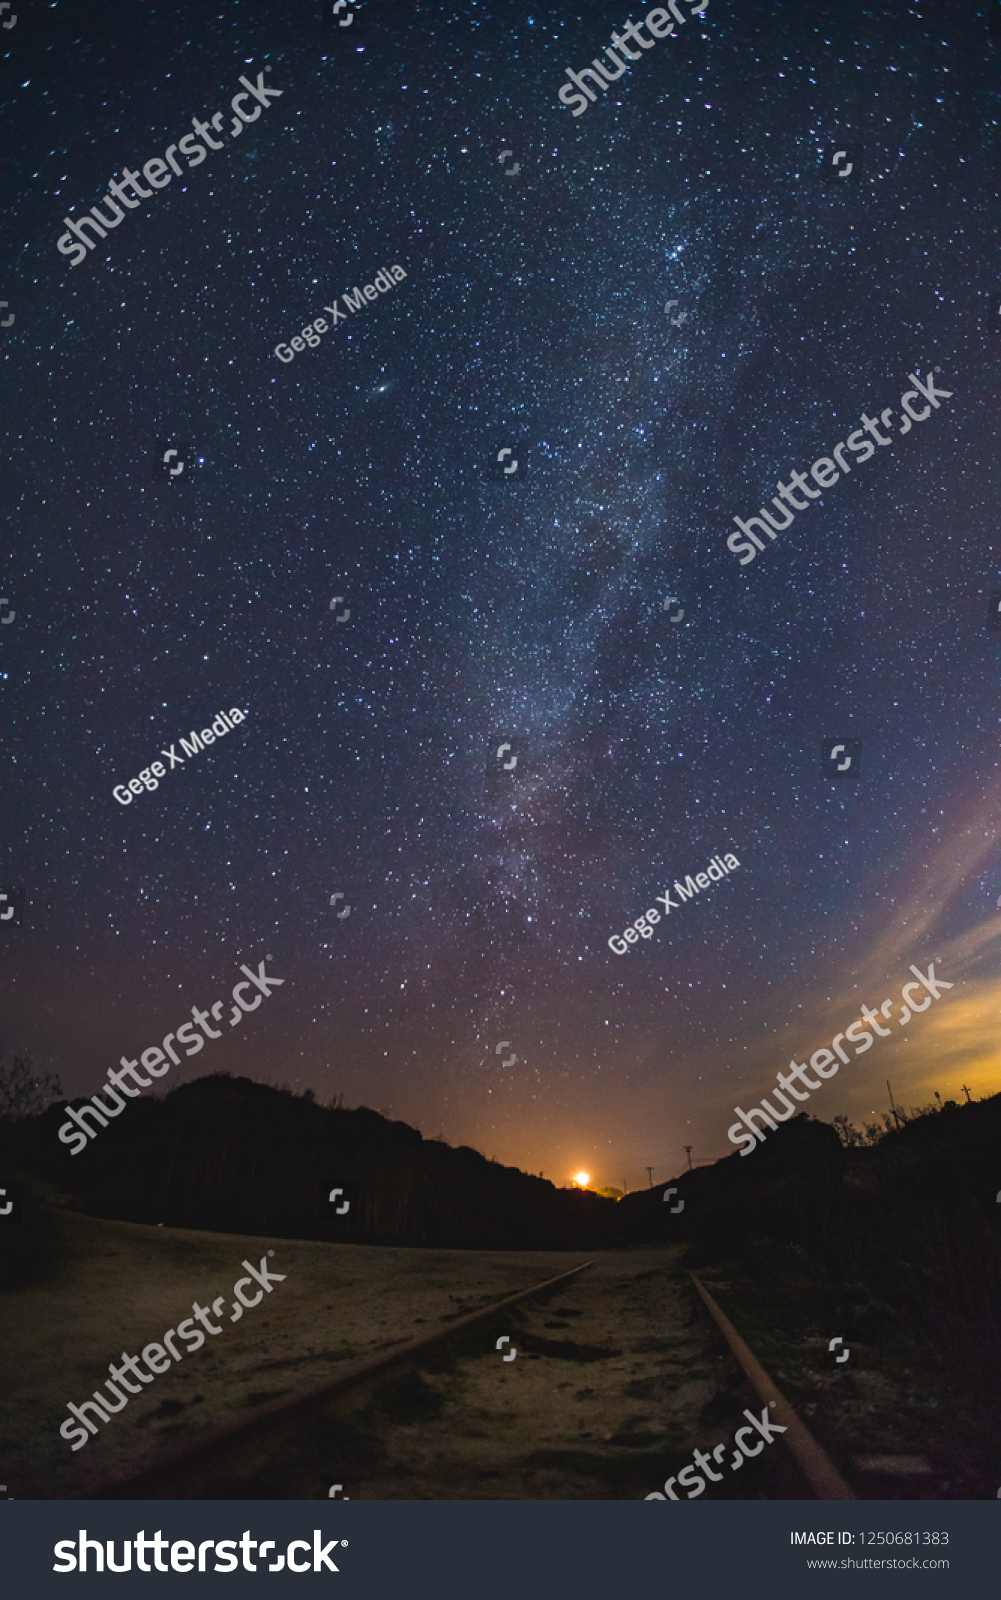 Milky Way Astrophotography Star Night Colorful Sky Galaxy long exposure train track mountain view #1250681383